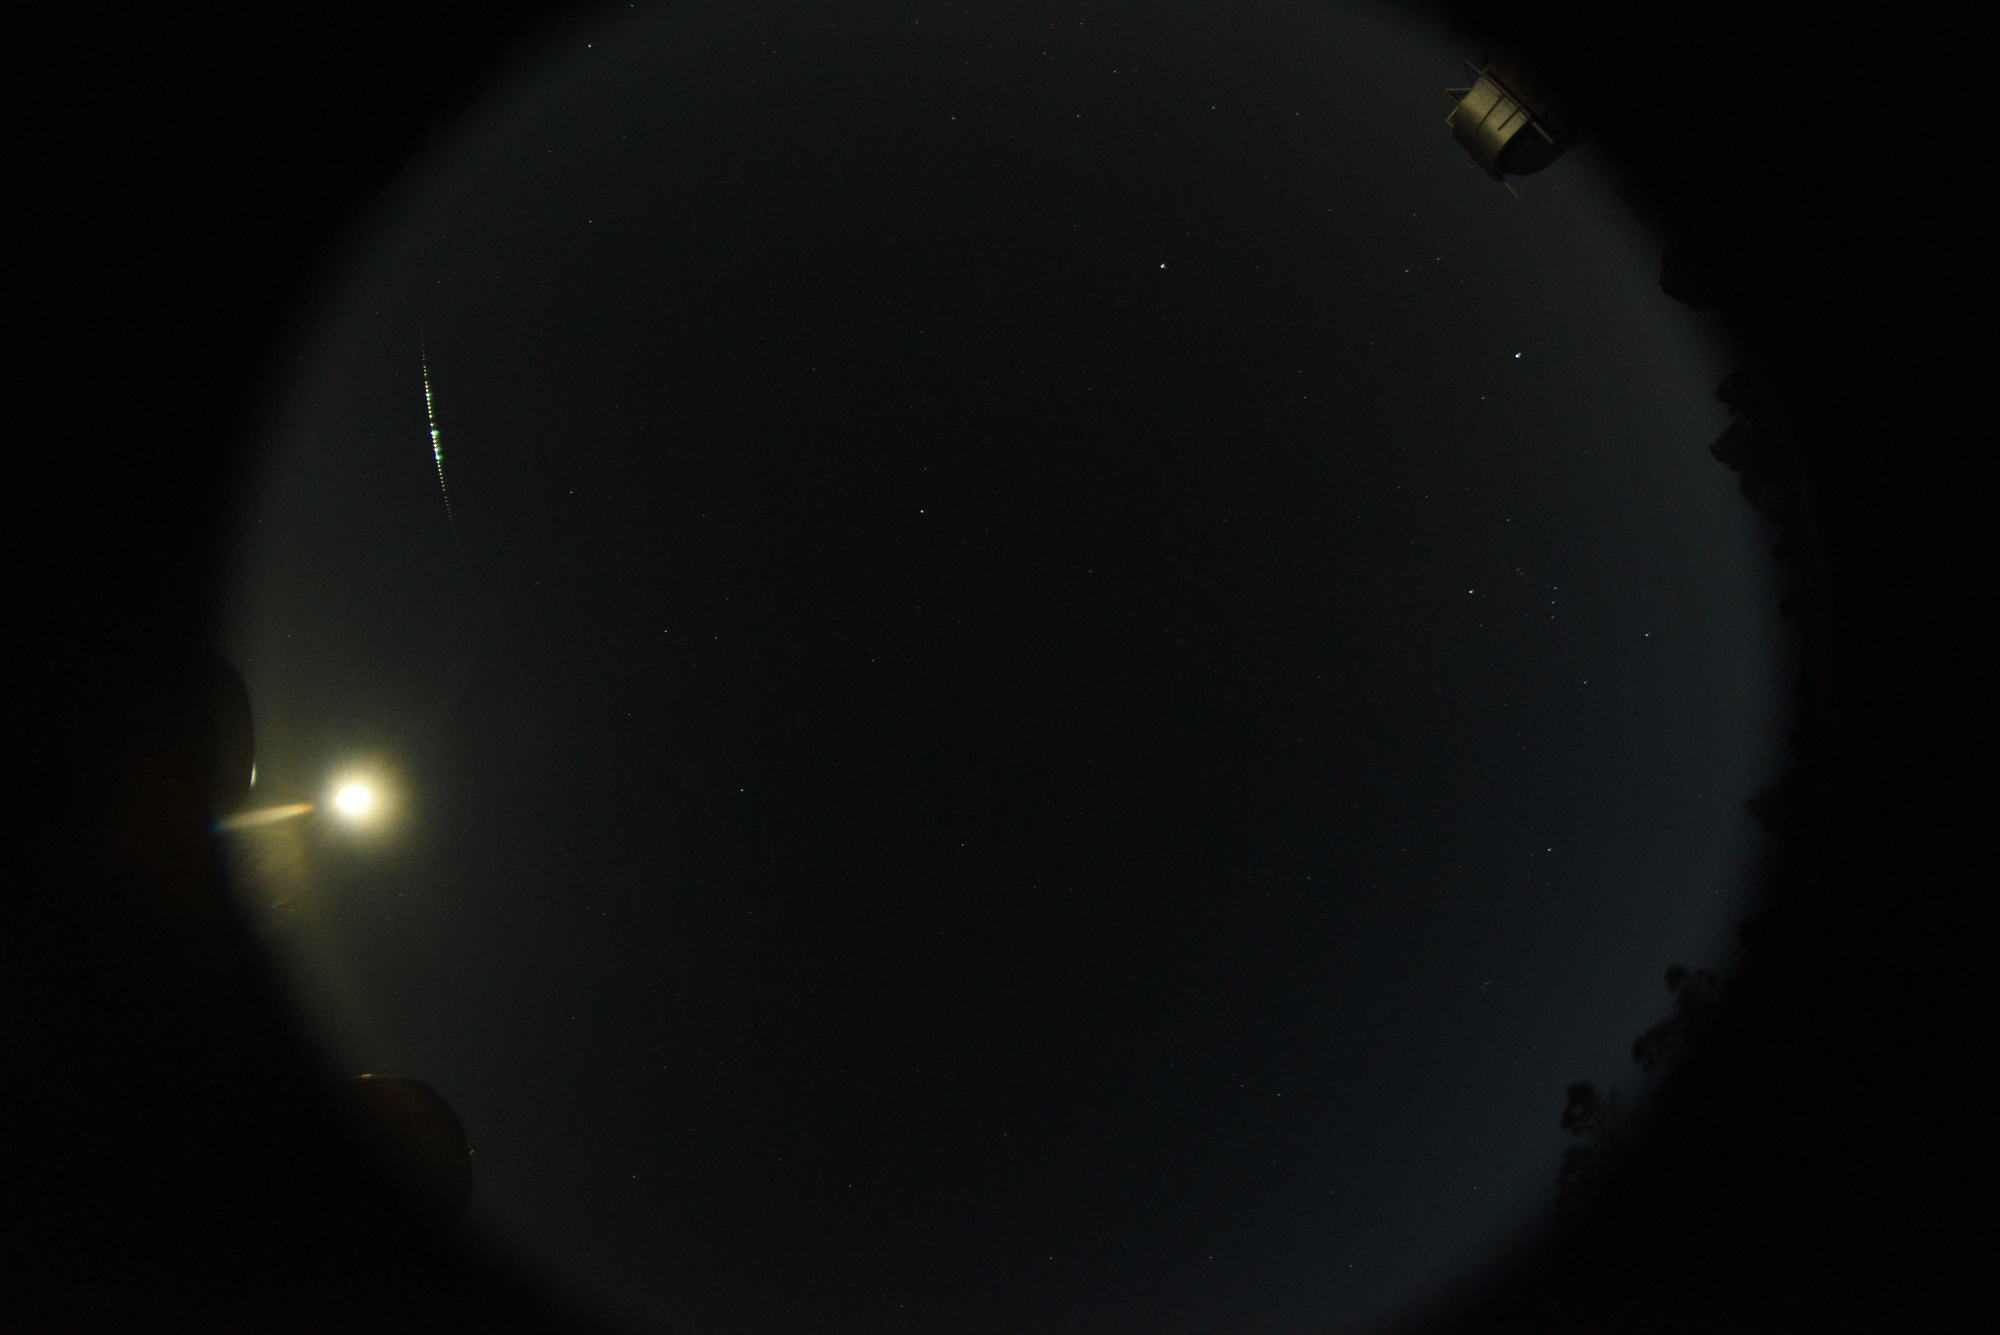 All-sky photo of the fireball captured by the Mount Stromlo camera system during the very first night of it's operation.